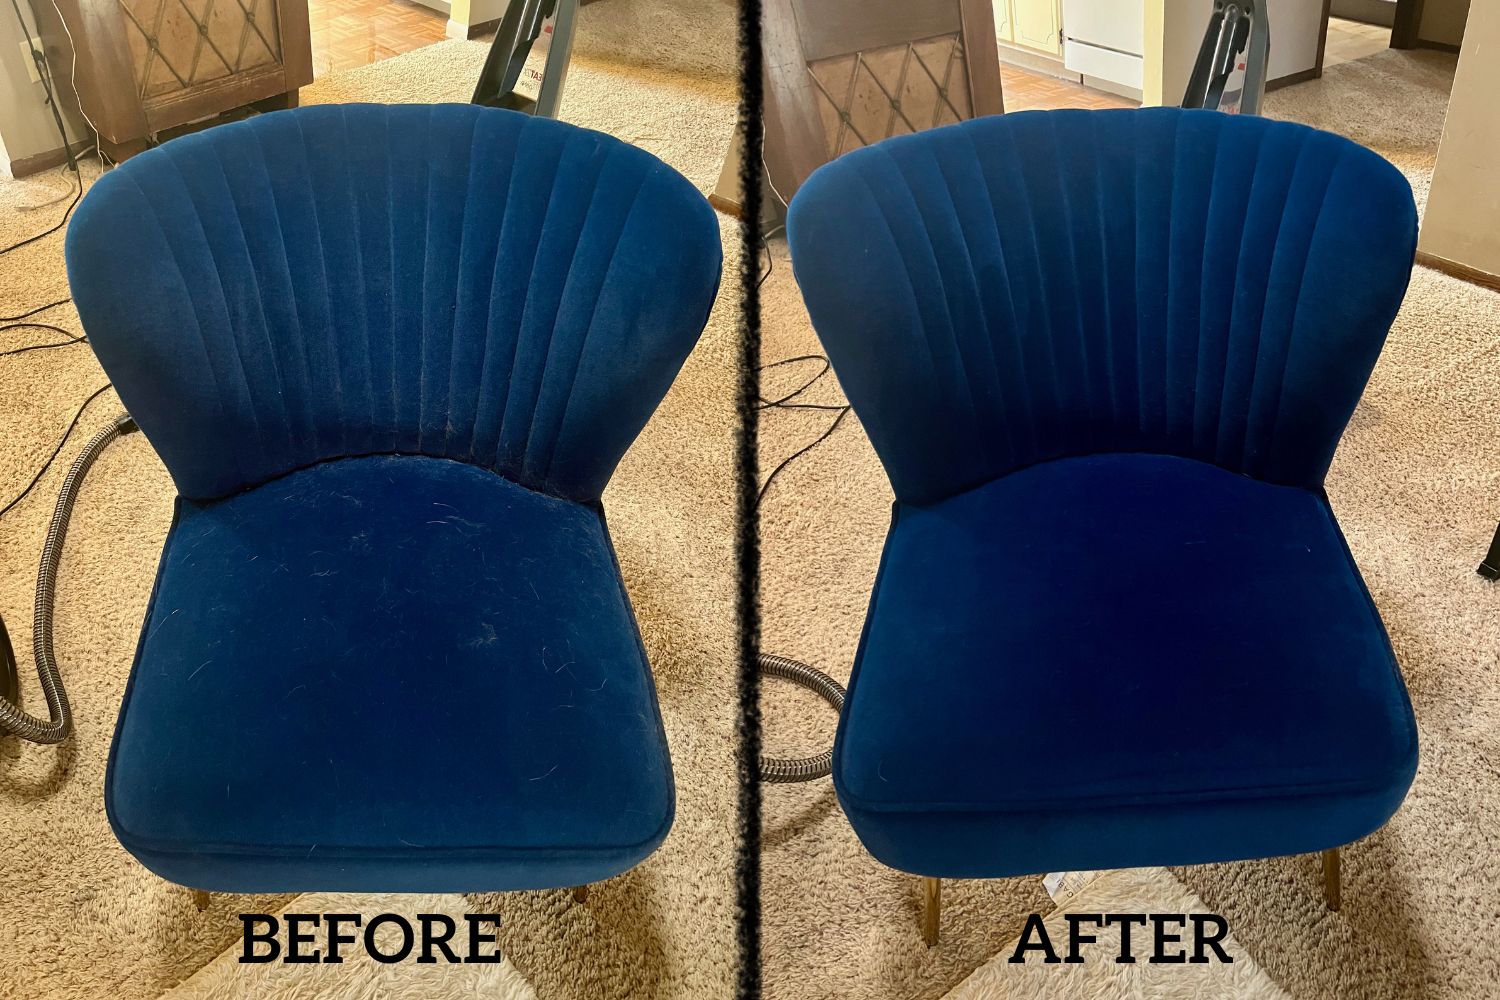 Side by side before and after of dirty navy chair and cleaned navy chair